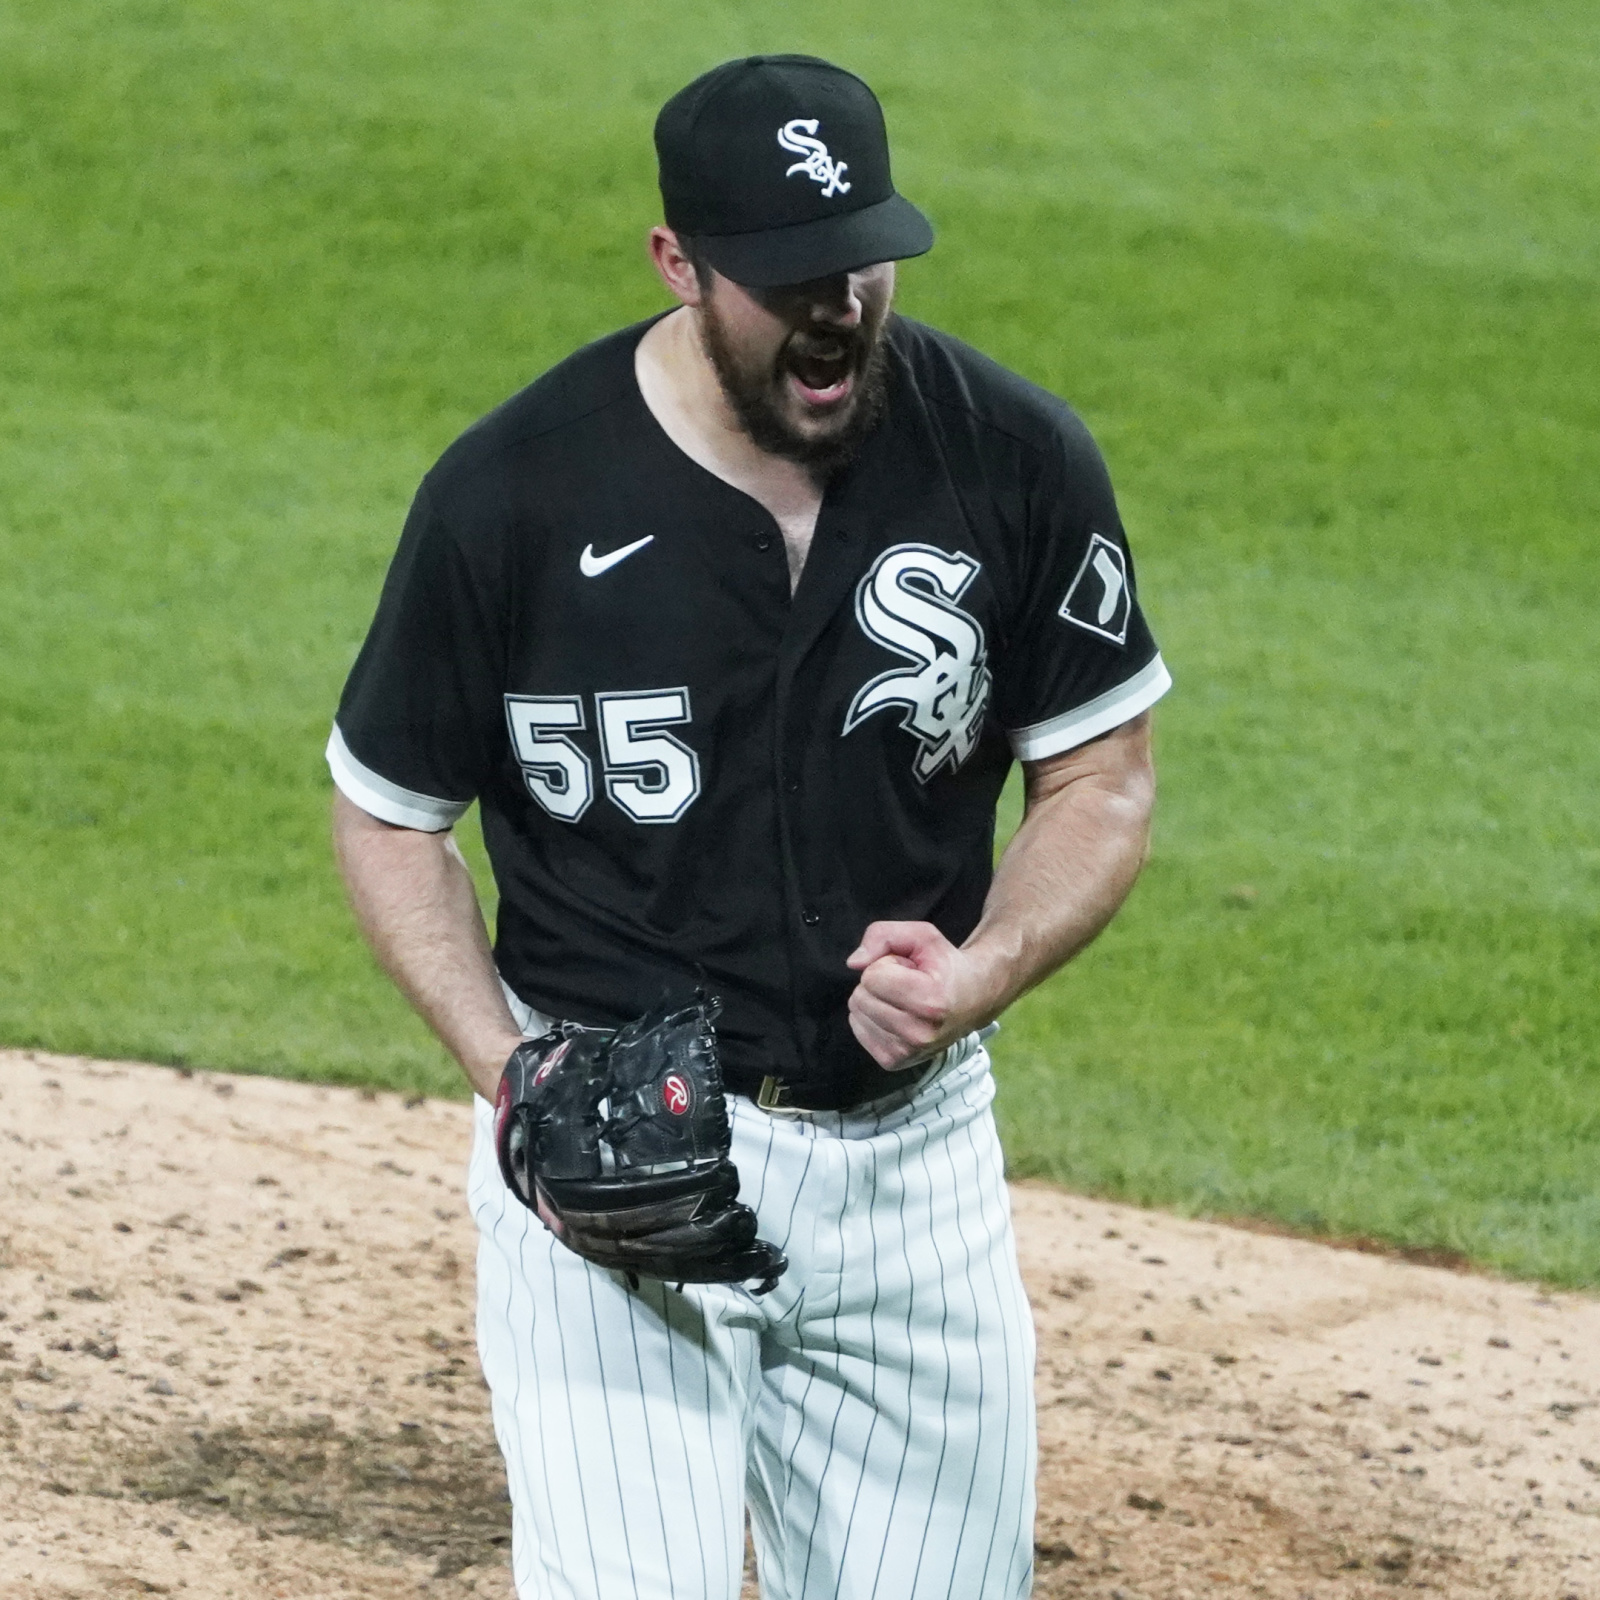 MLB Trade Rumors and News: Rodon throws a no-hitter, slew of